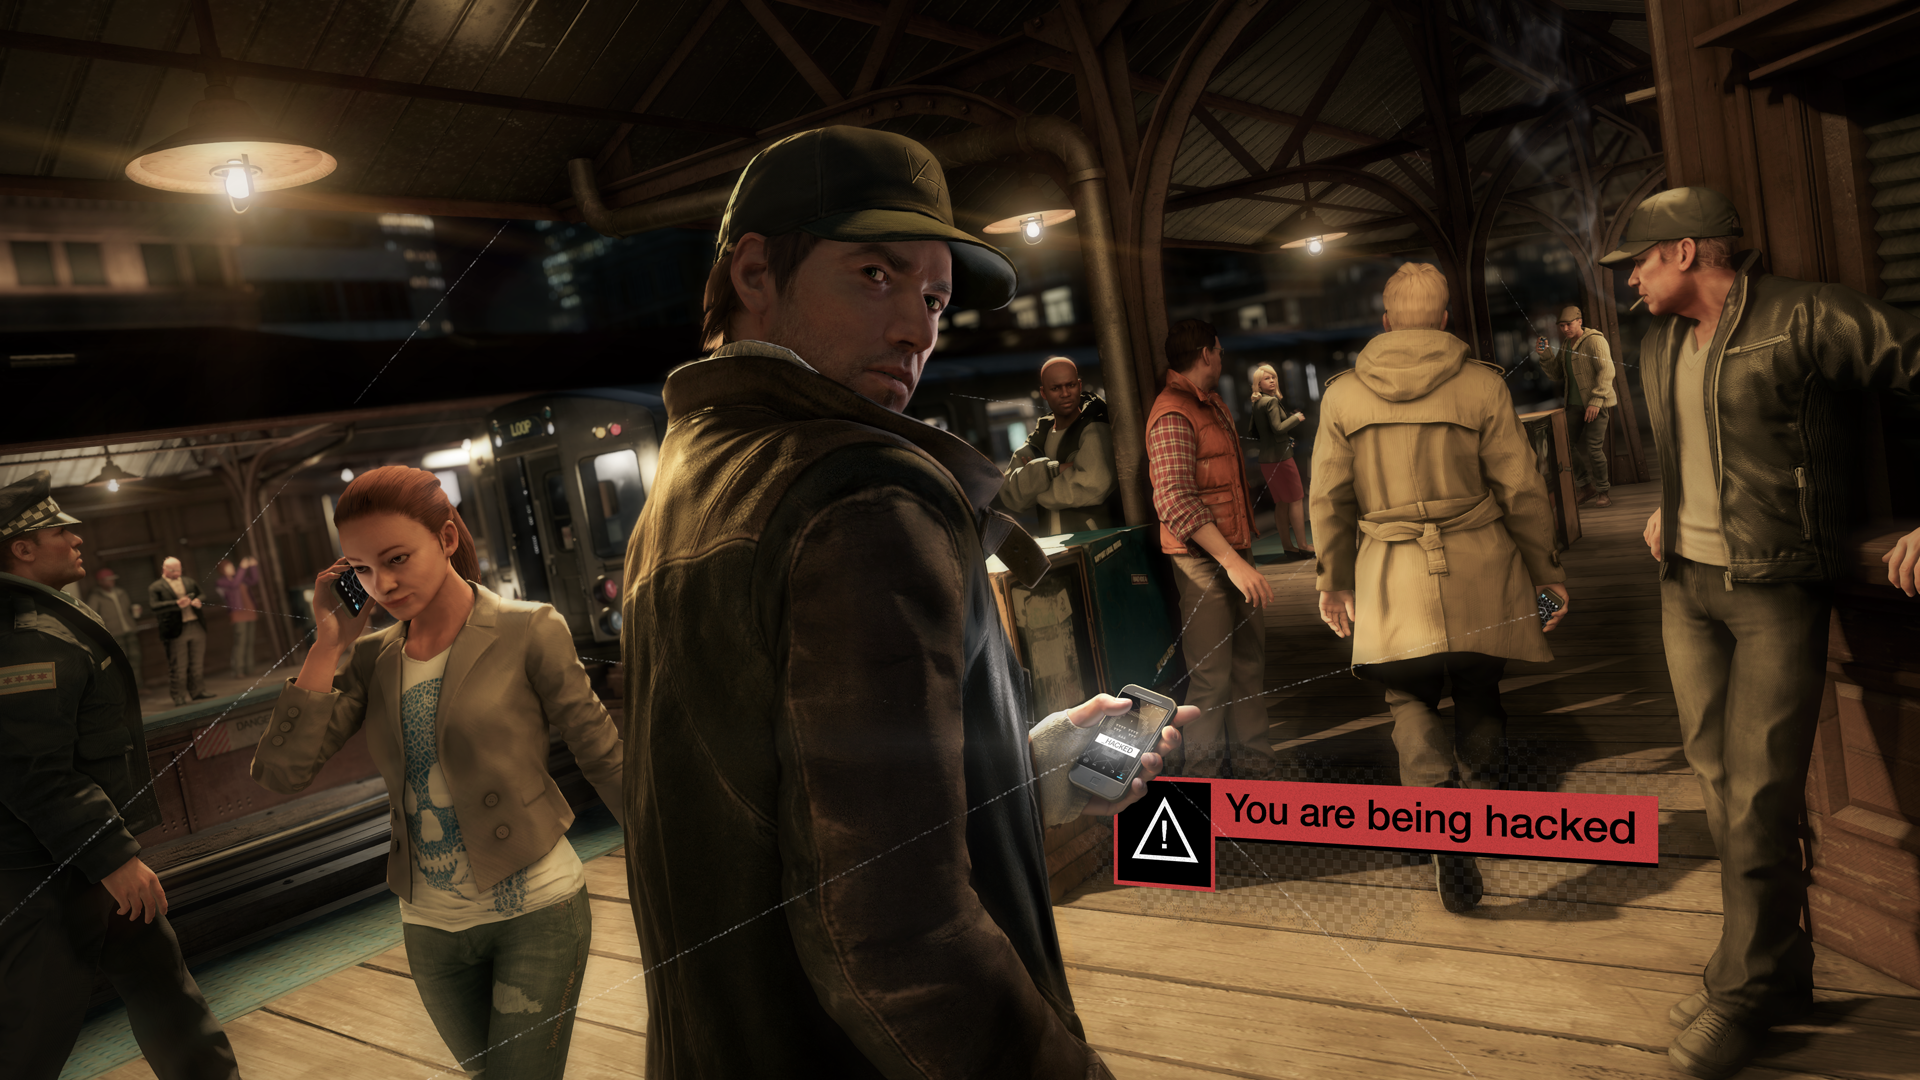 movimiento Omitir Incitar Watch Dogs doesn't have cheat codes - GameSpot